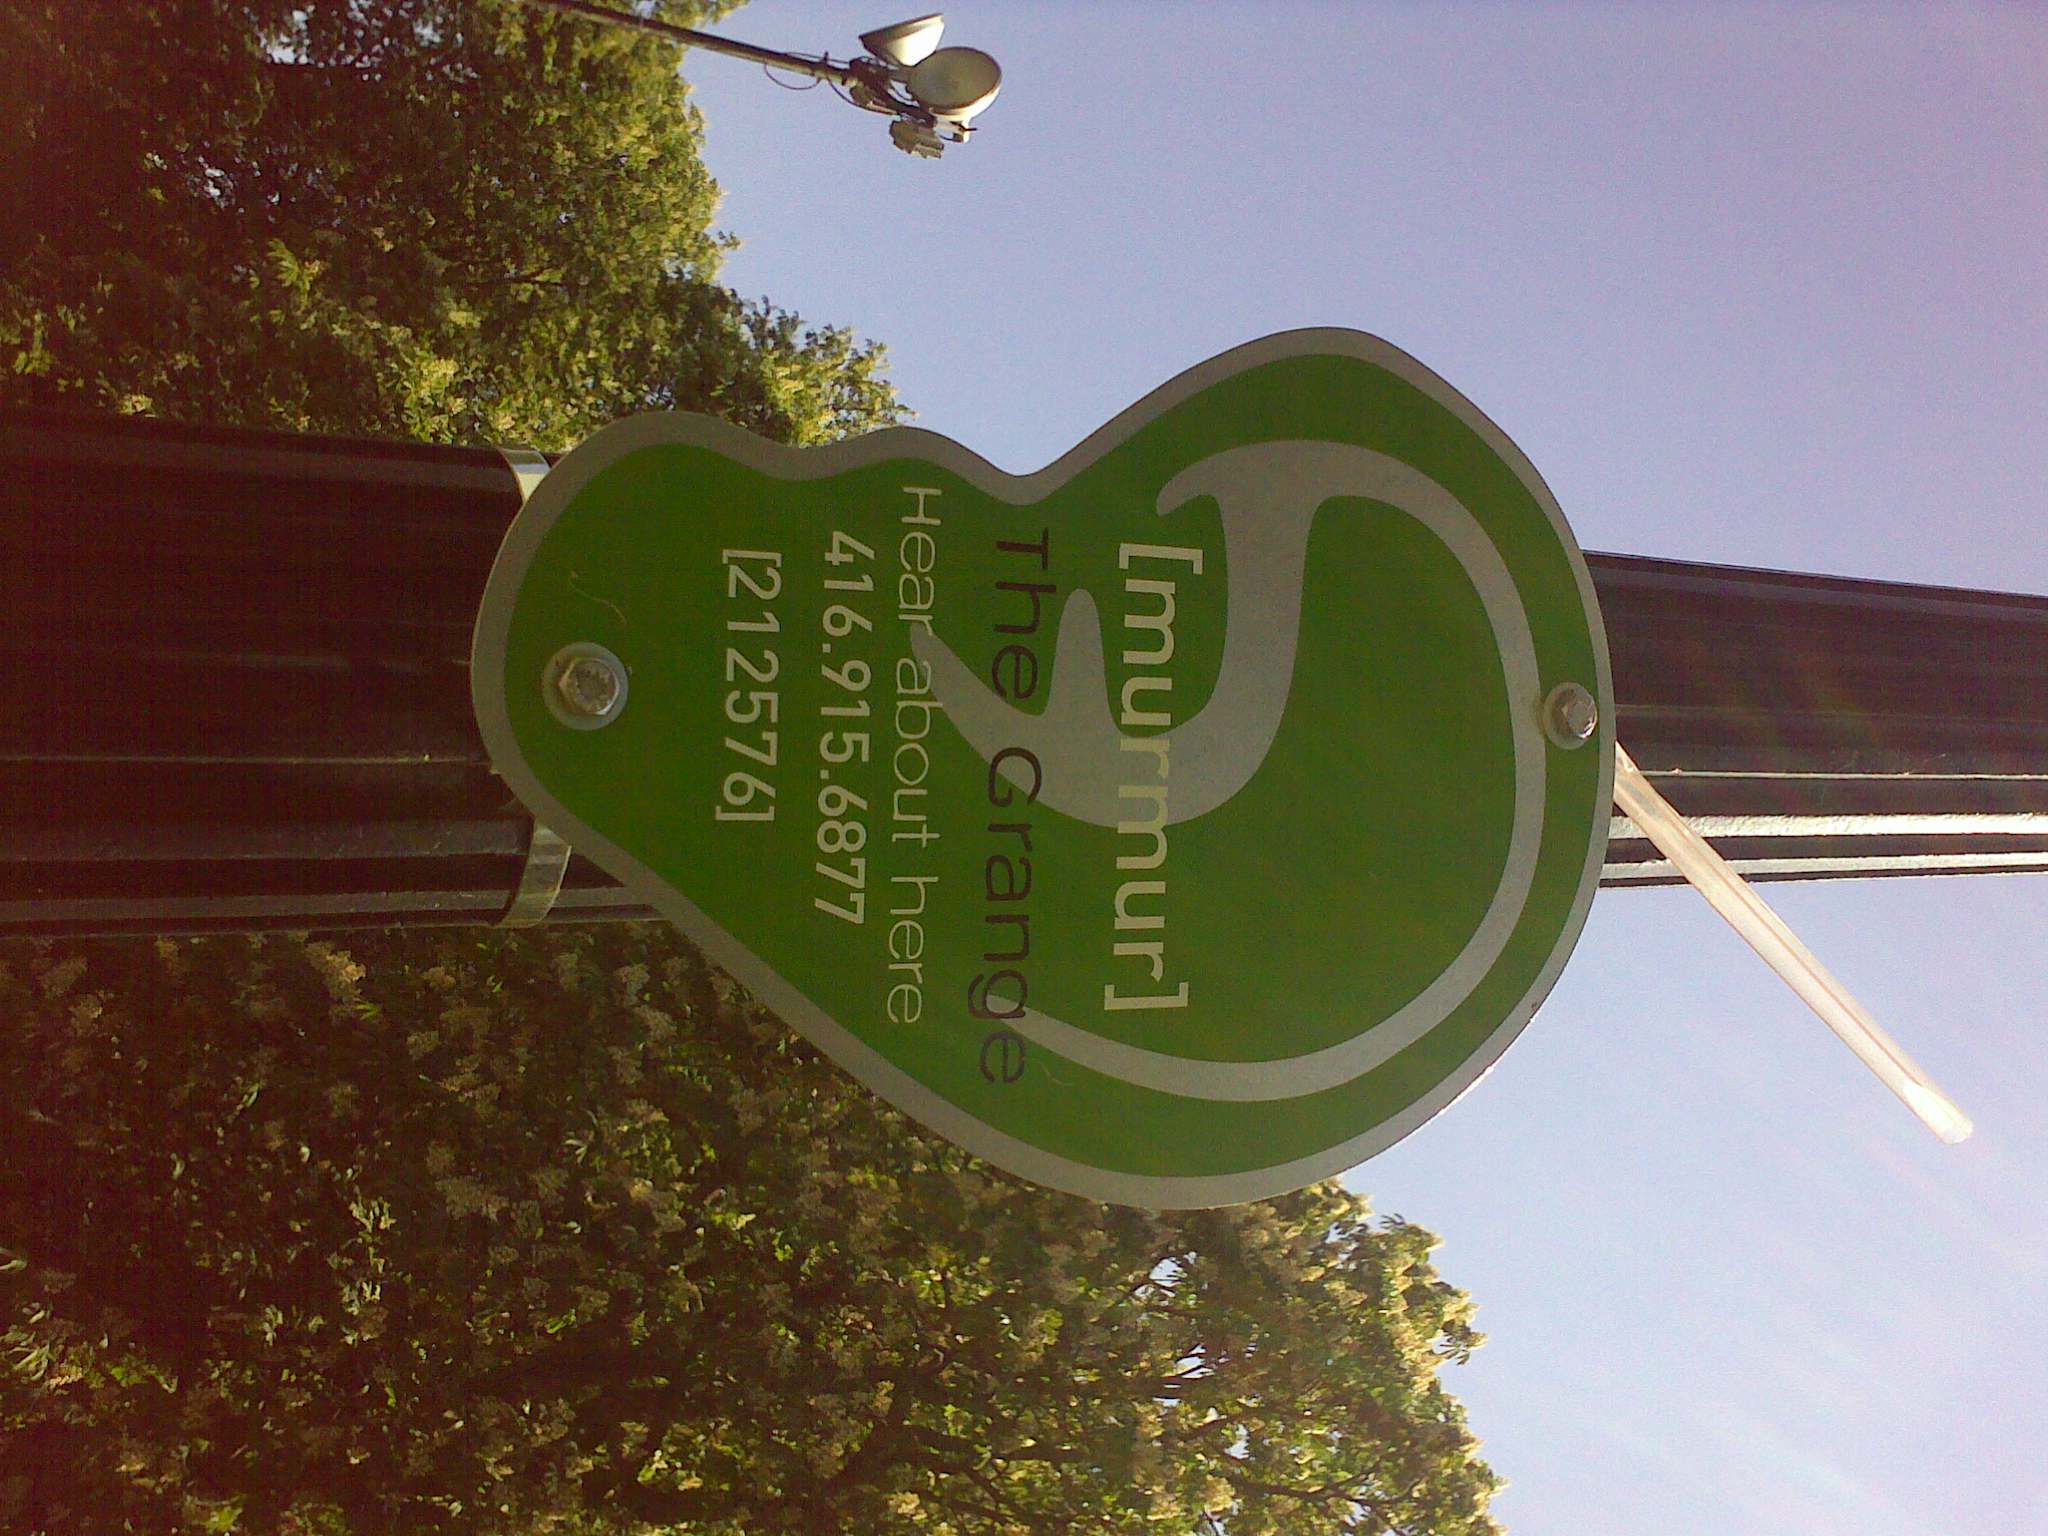 a green street sign on the side of a street